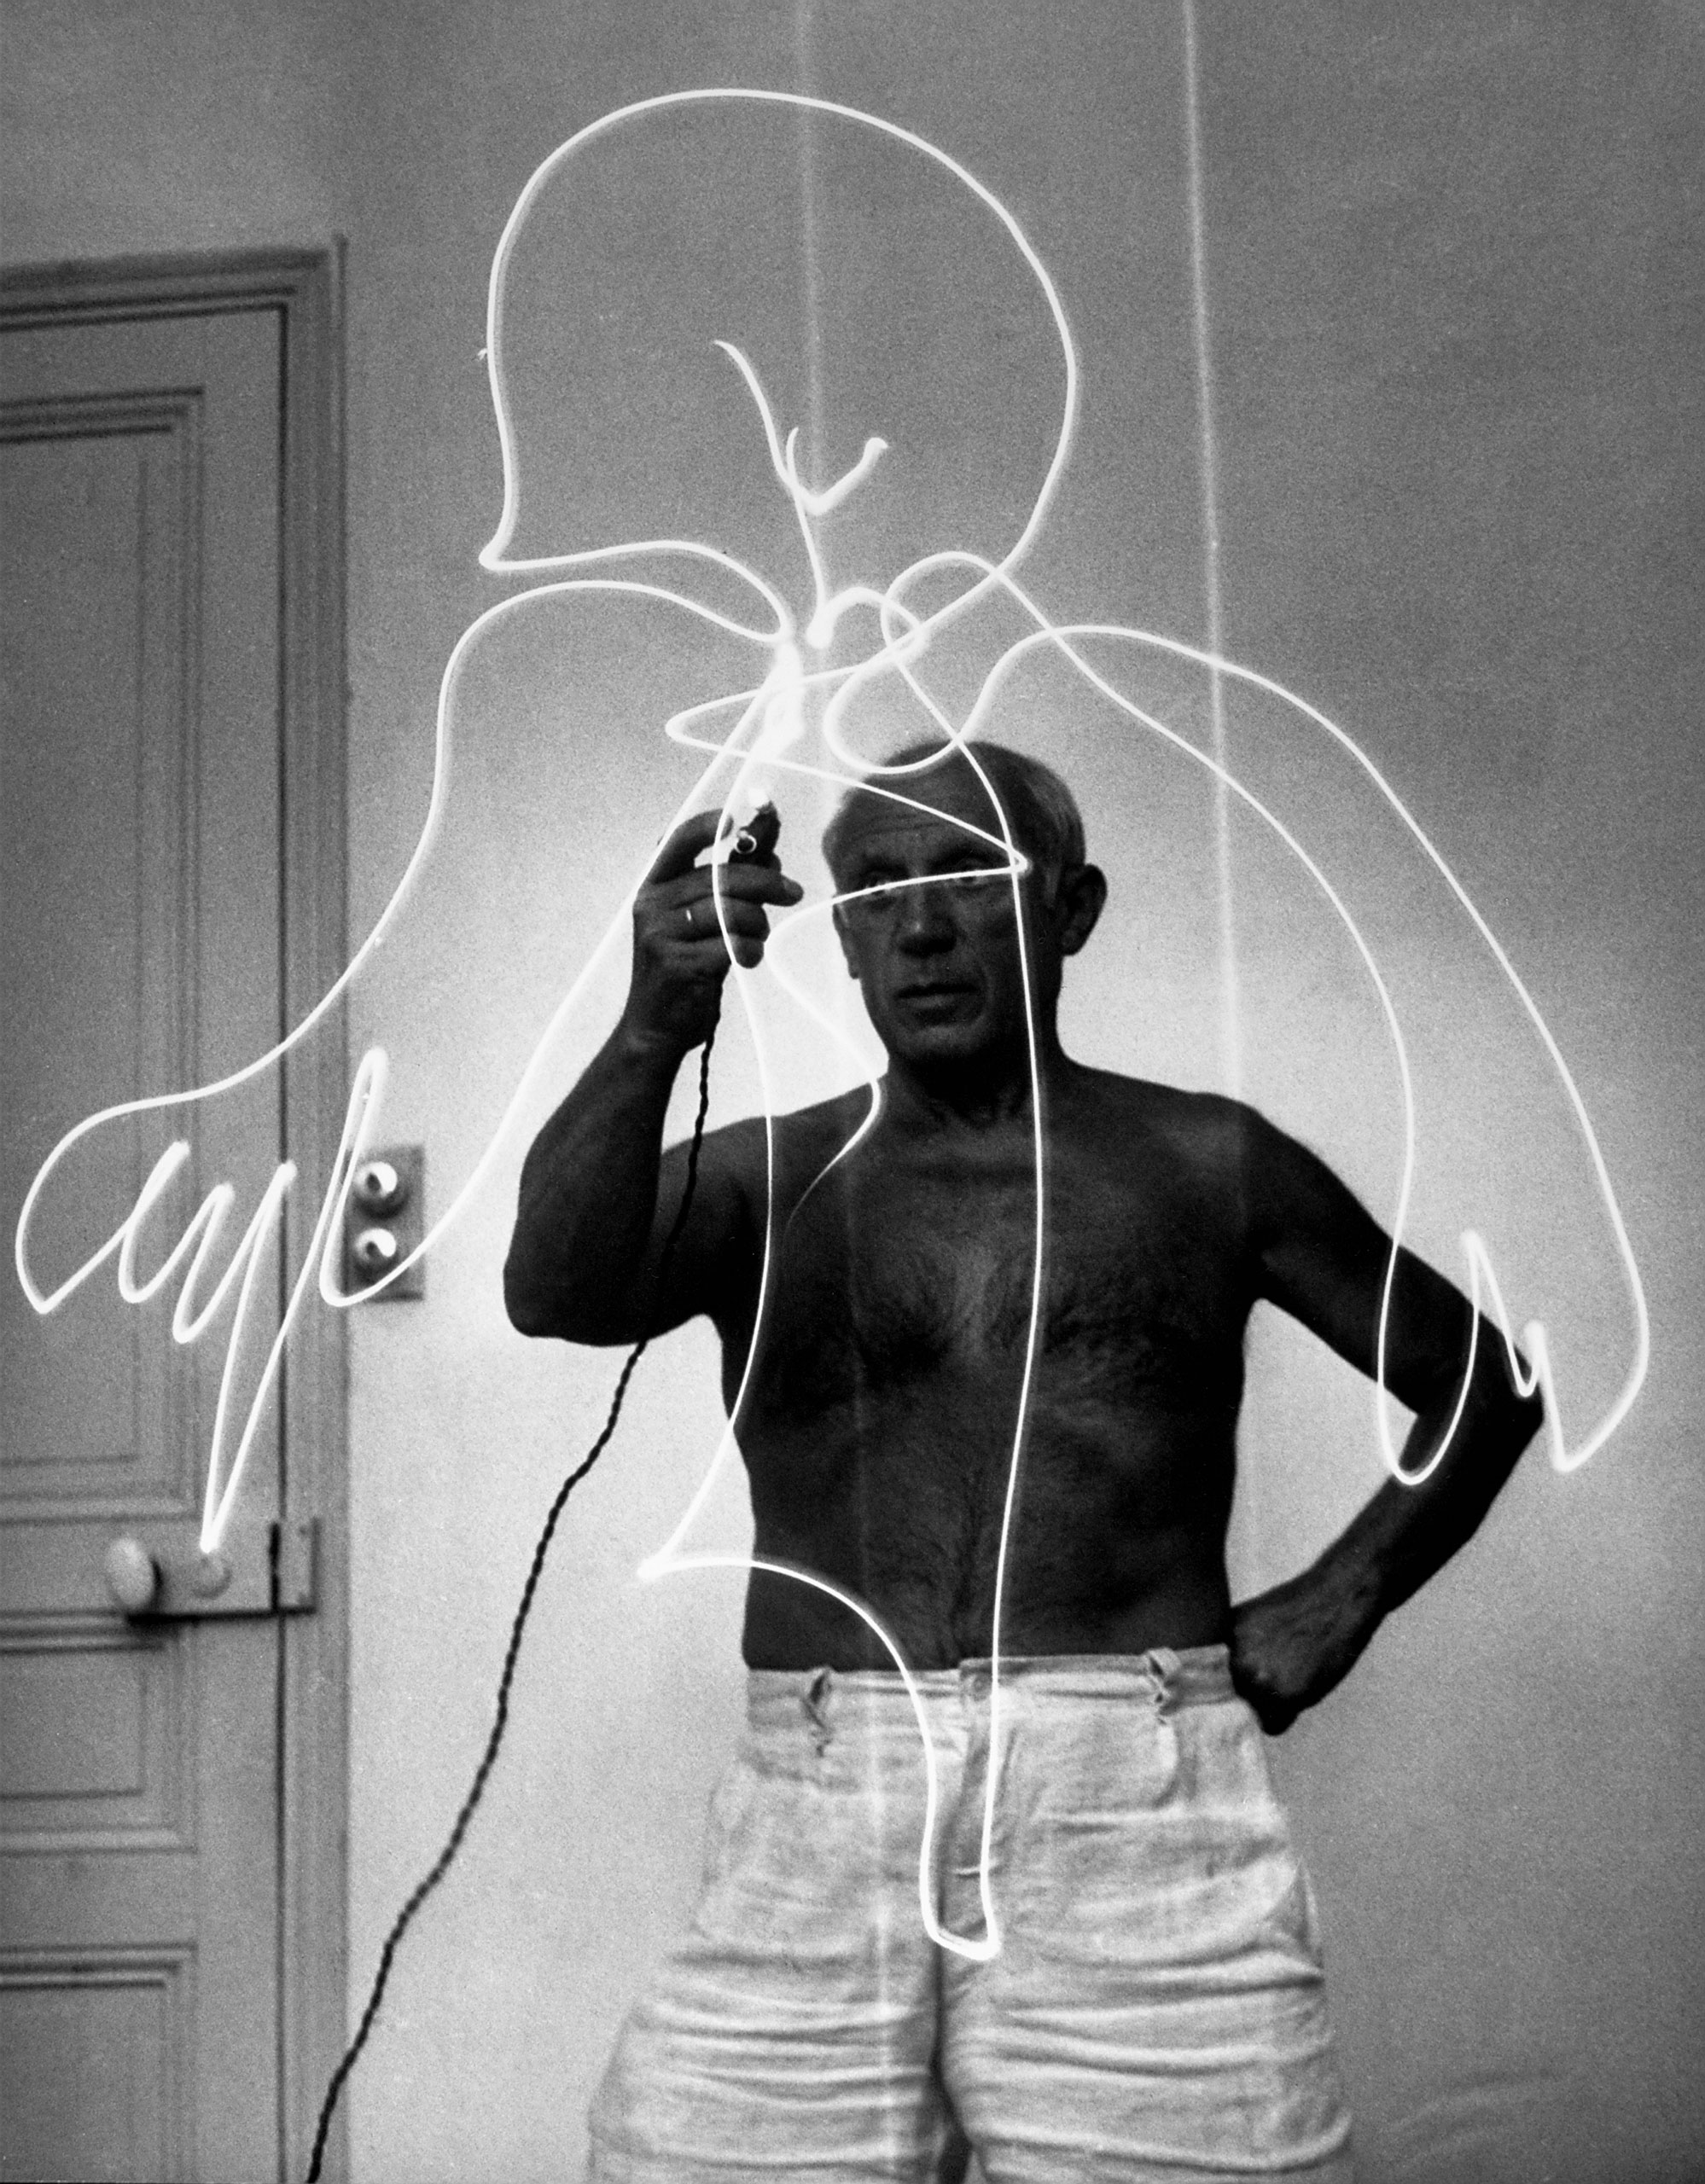 Pablo Picasso casually carves a figure in space, 1949.